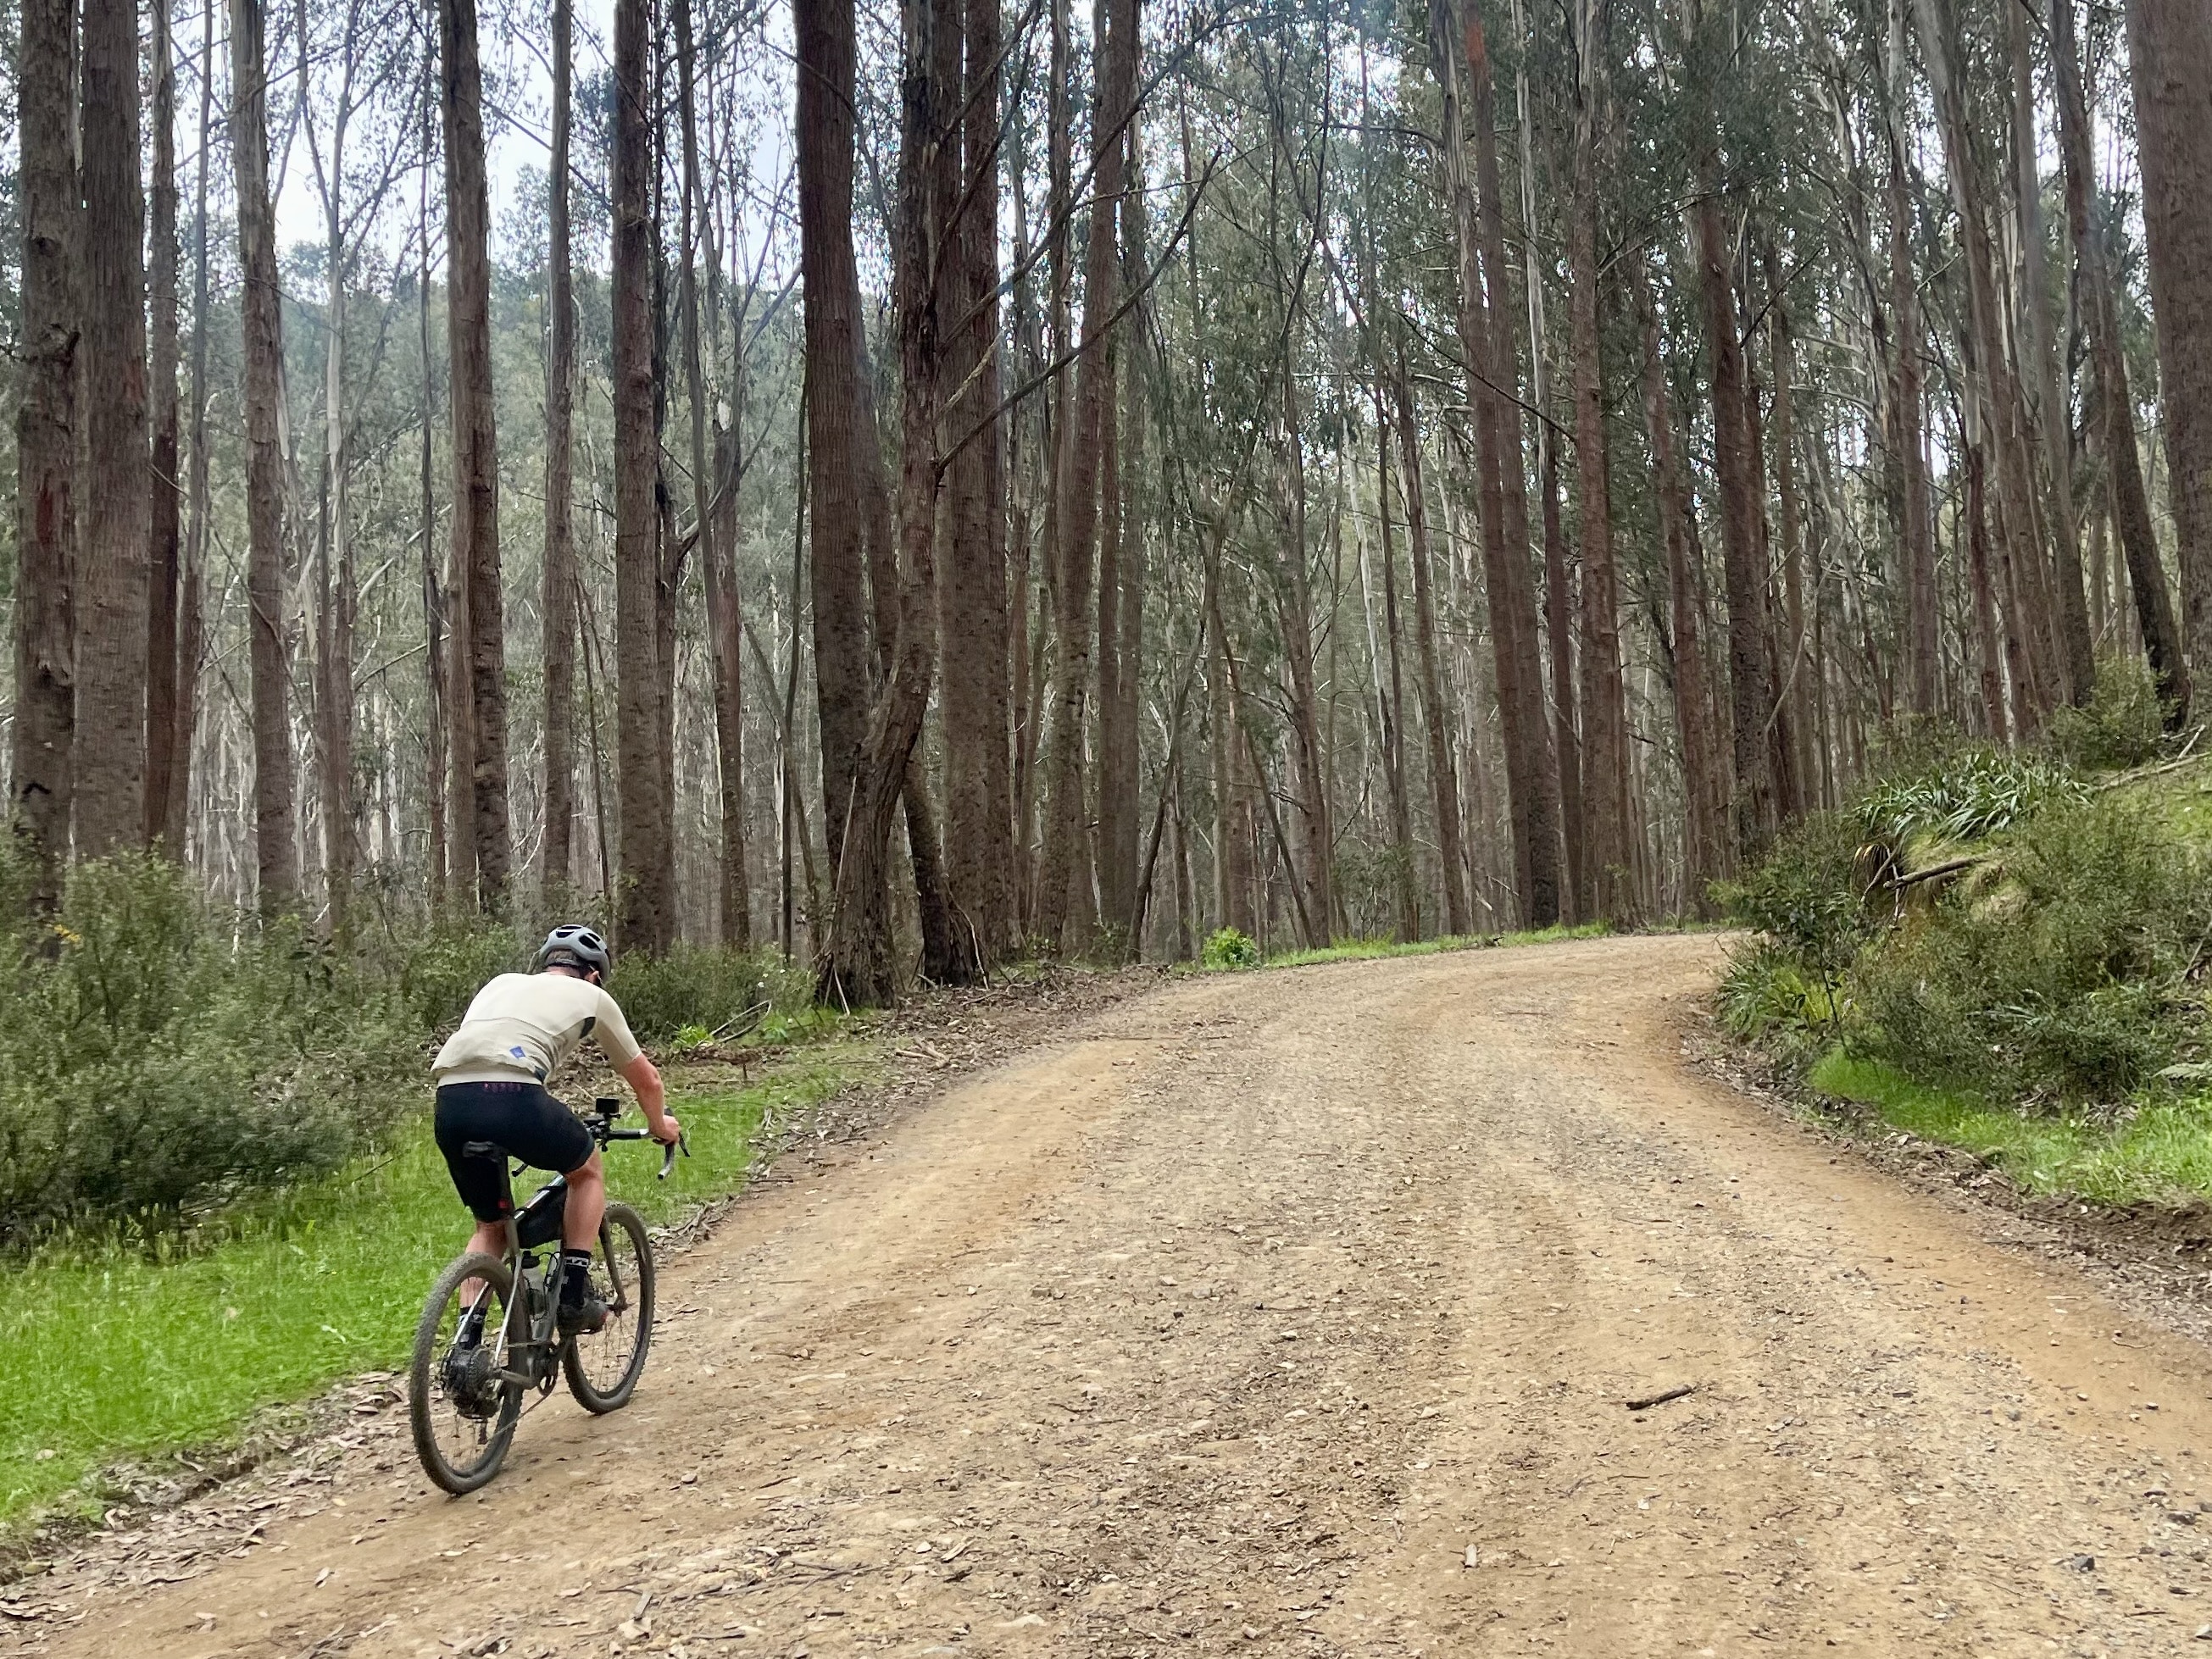 Cyclist riding on a gravel road through a grove of tall native trees